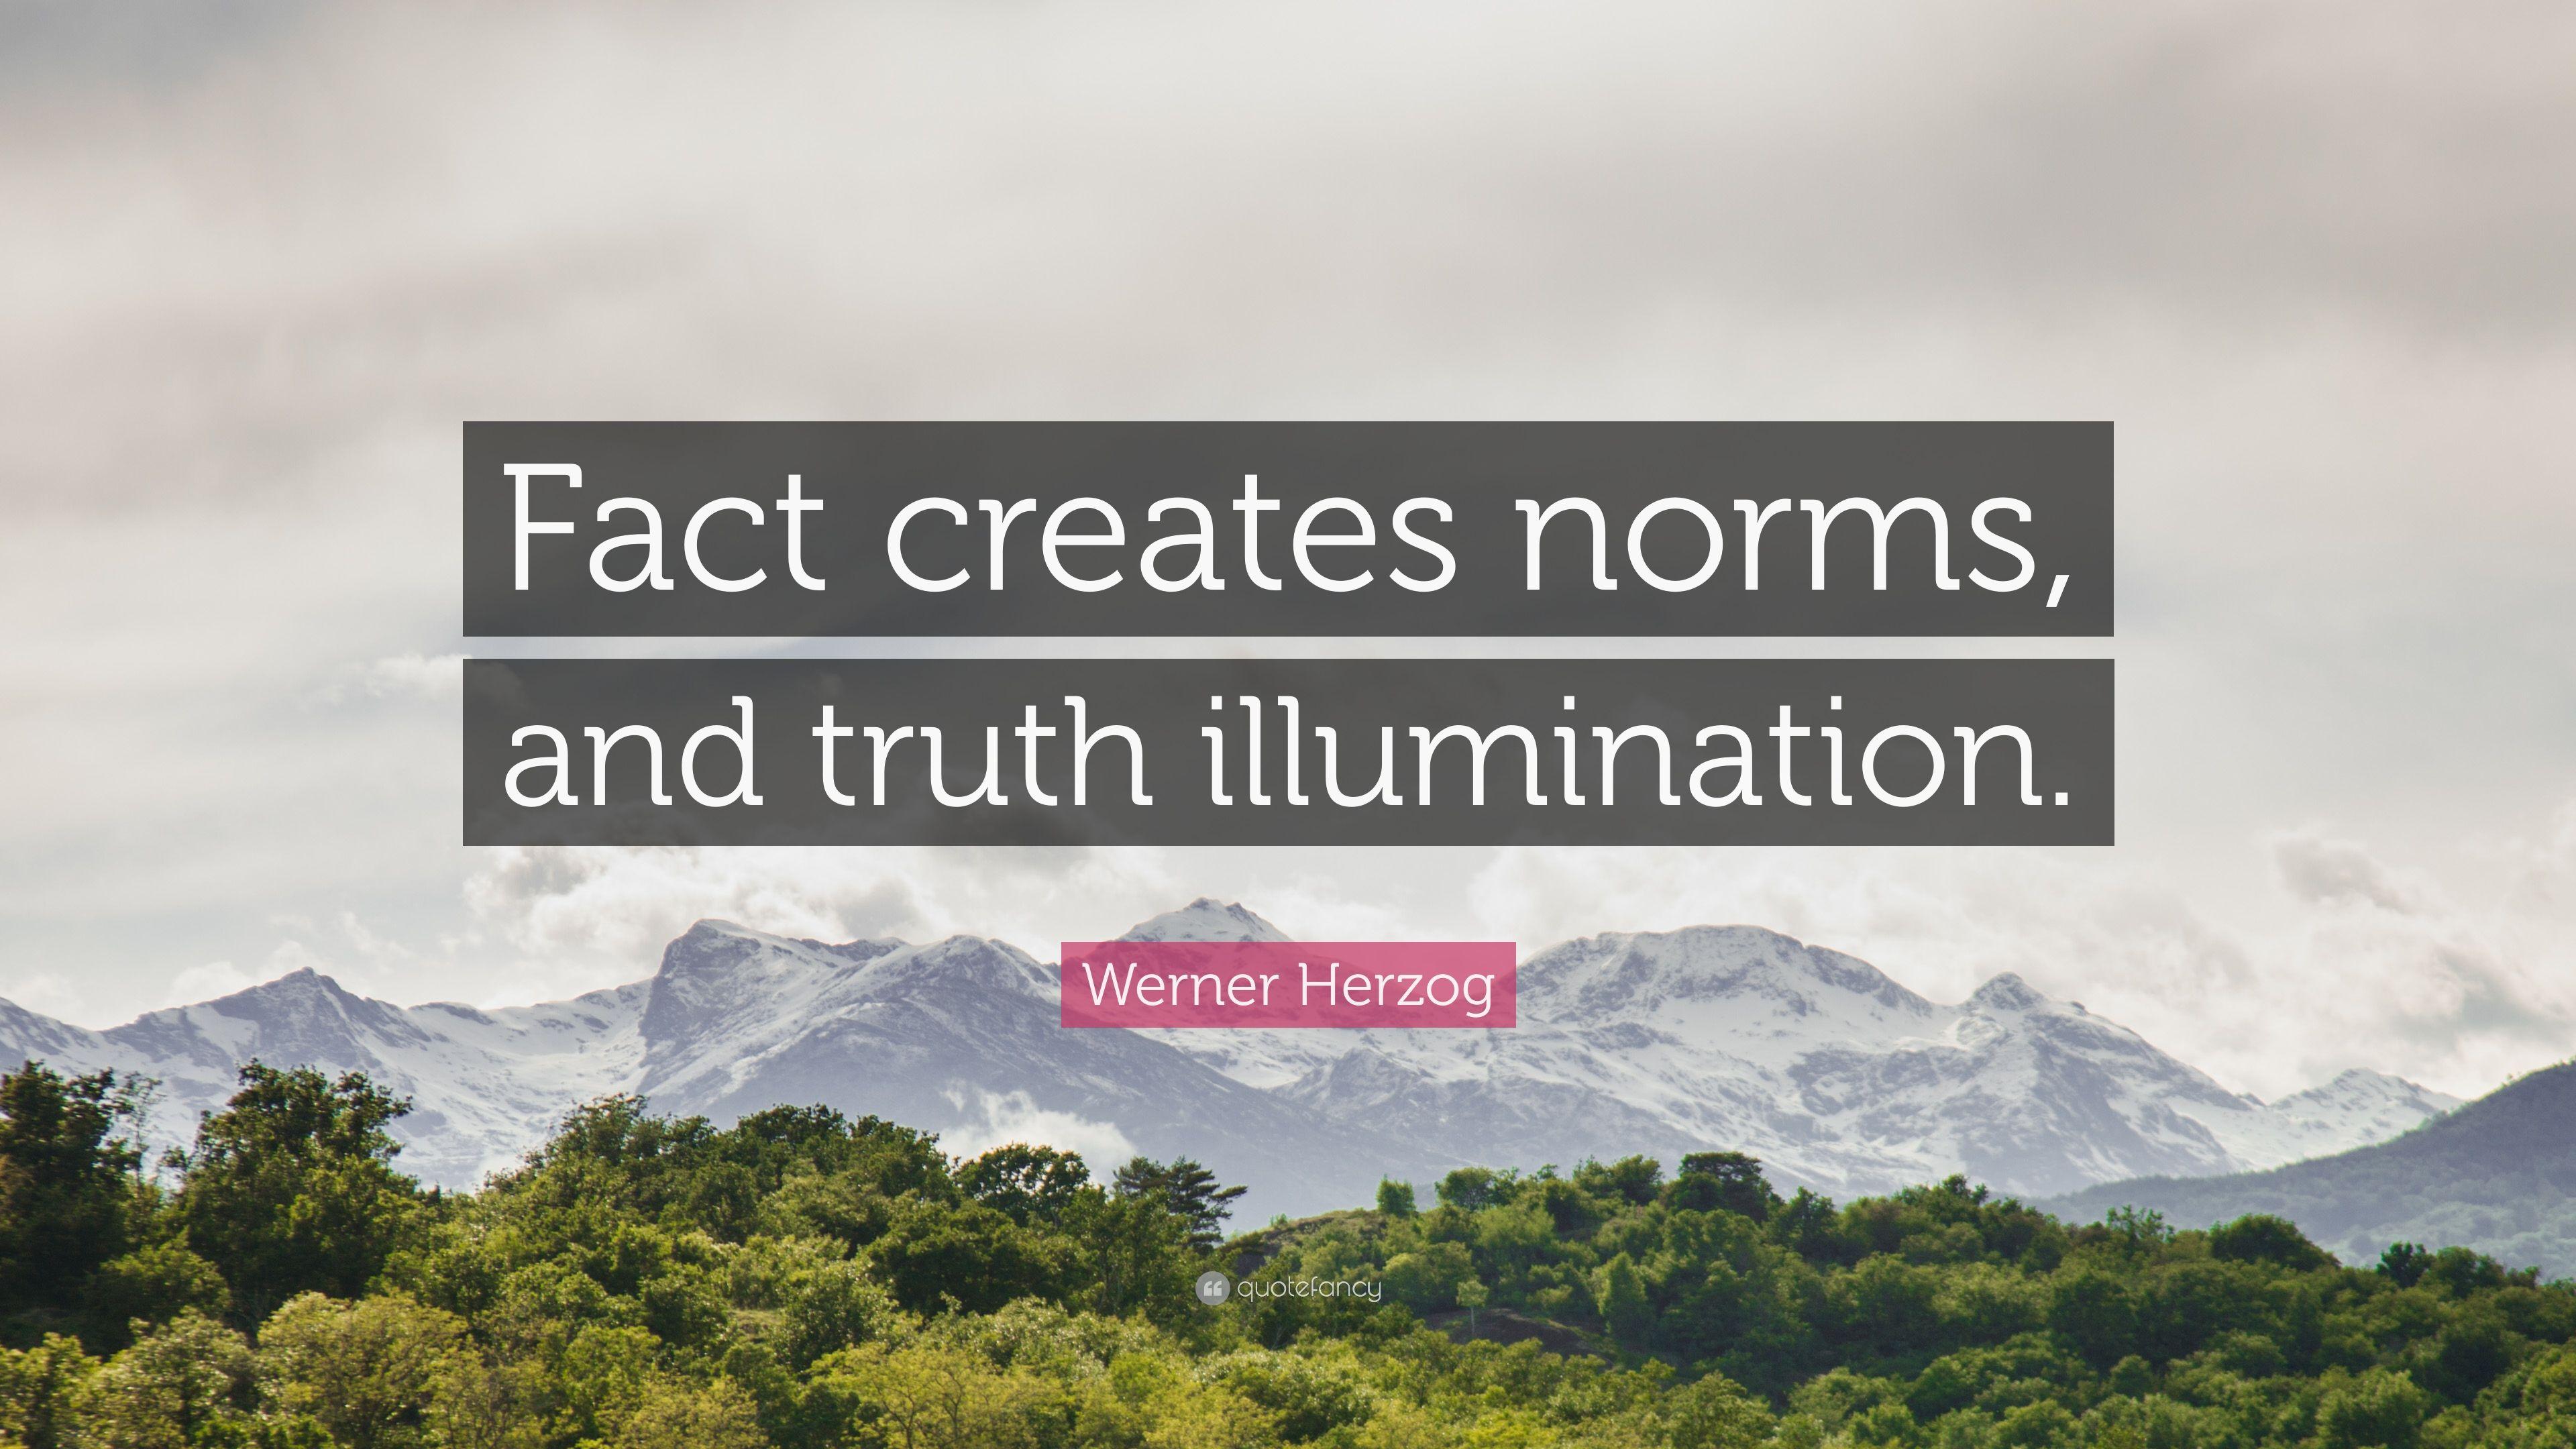 Werner Herzog Quote: “Fact creates norms, and truth illumination